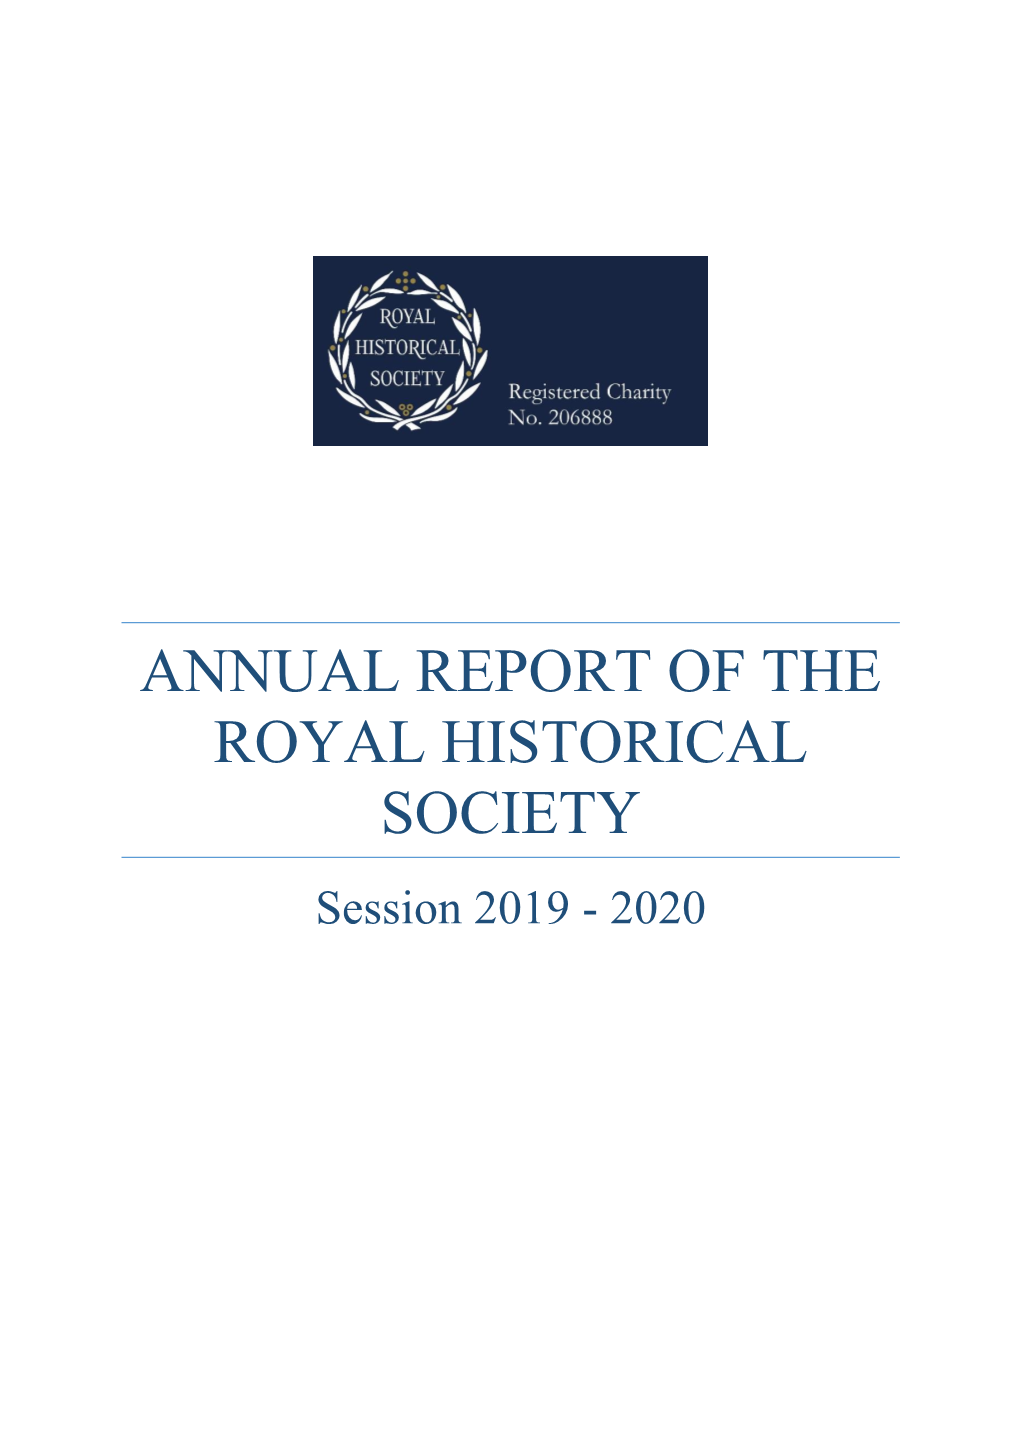 Annual Report of the Royal Historical Society 2019-20